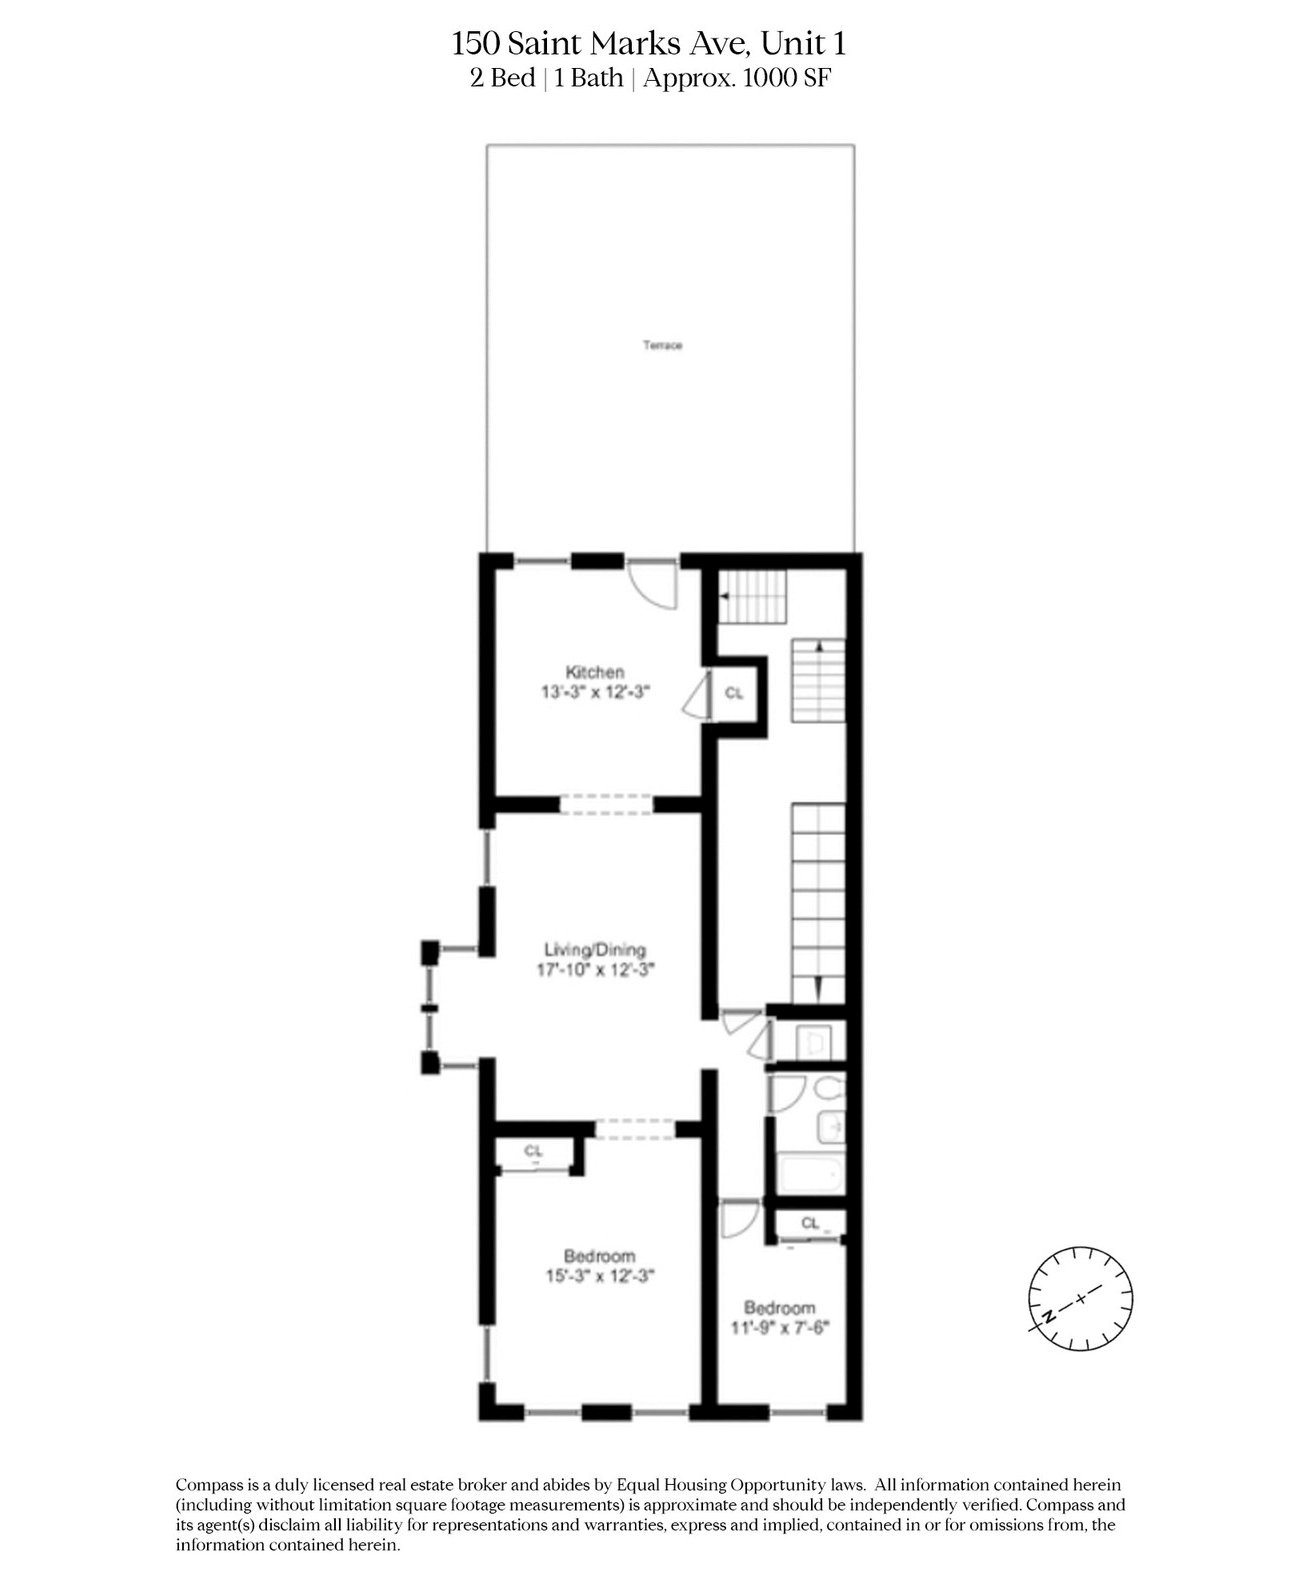 floorplan showing bedrooms at one end, kitchen at the other and a living room in between